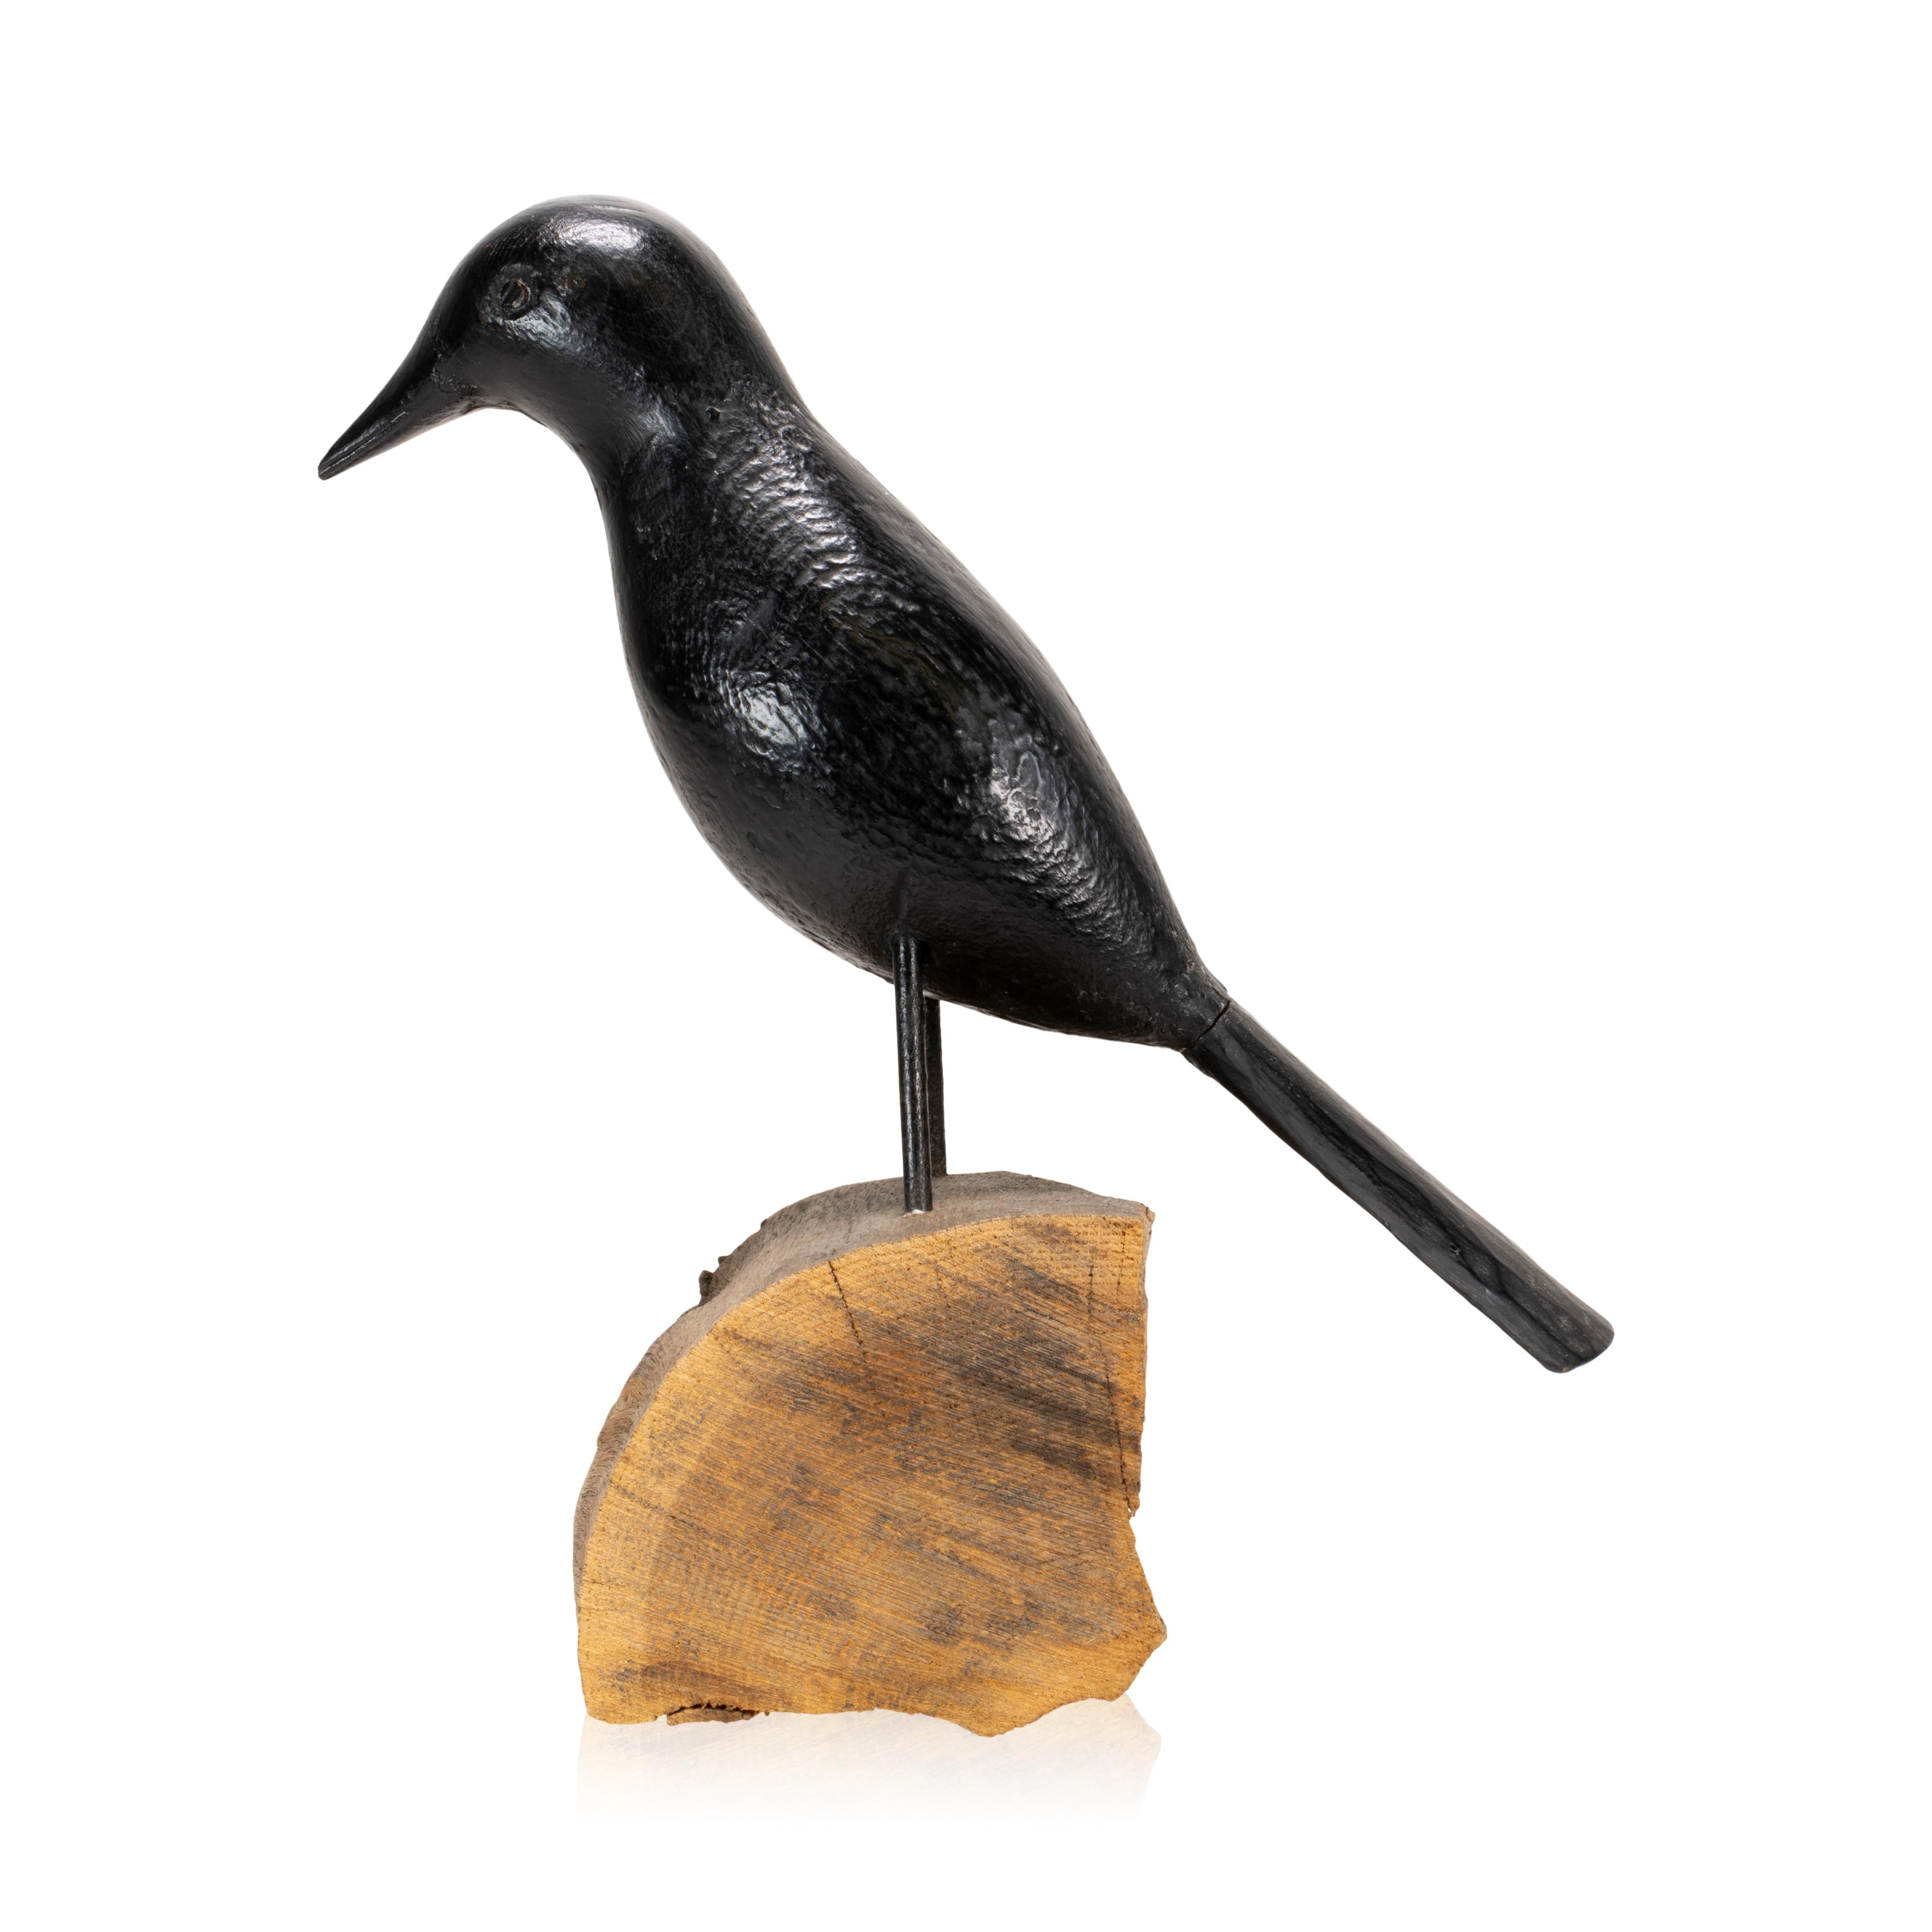 20th Century Crow decoy. Carved and painted on a wood base. Carver unknown

Period: 20th century
Origin: United States
Size: 13 1/4